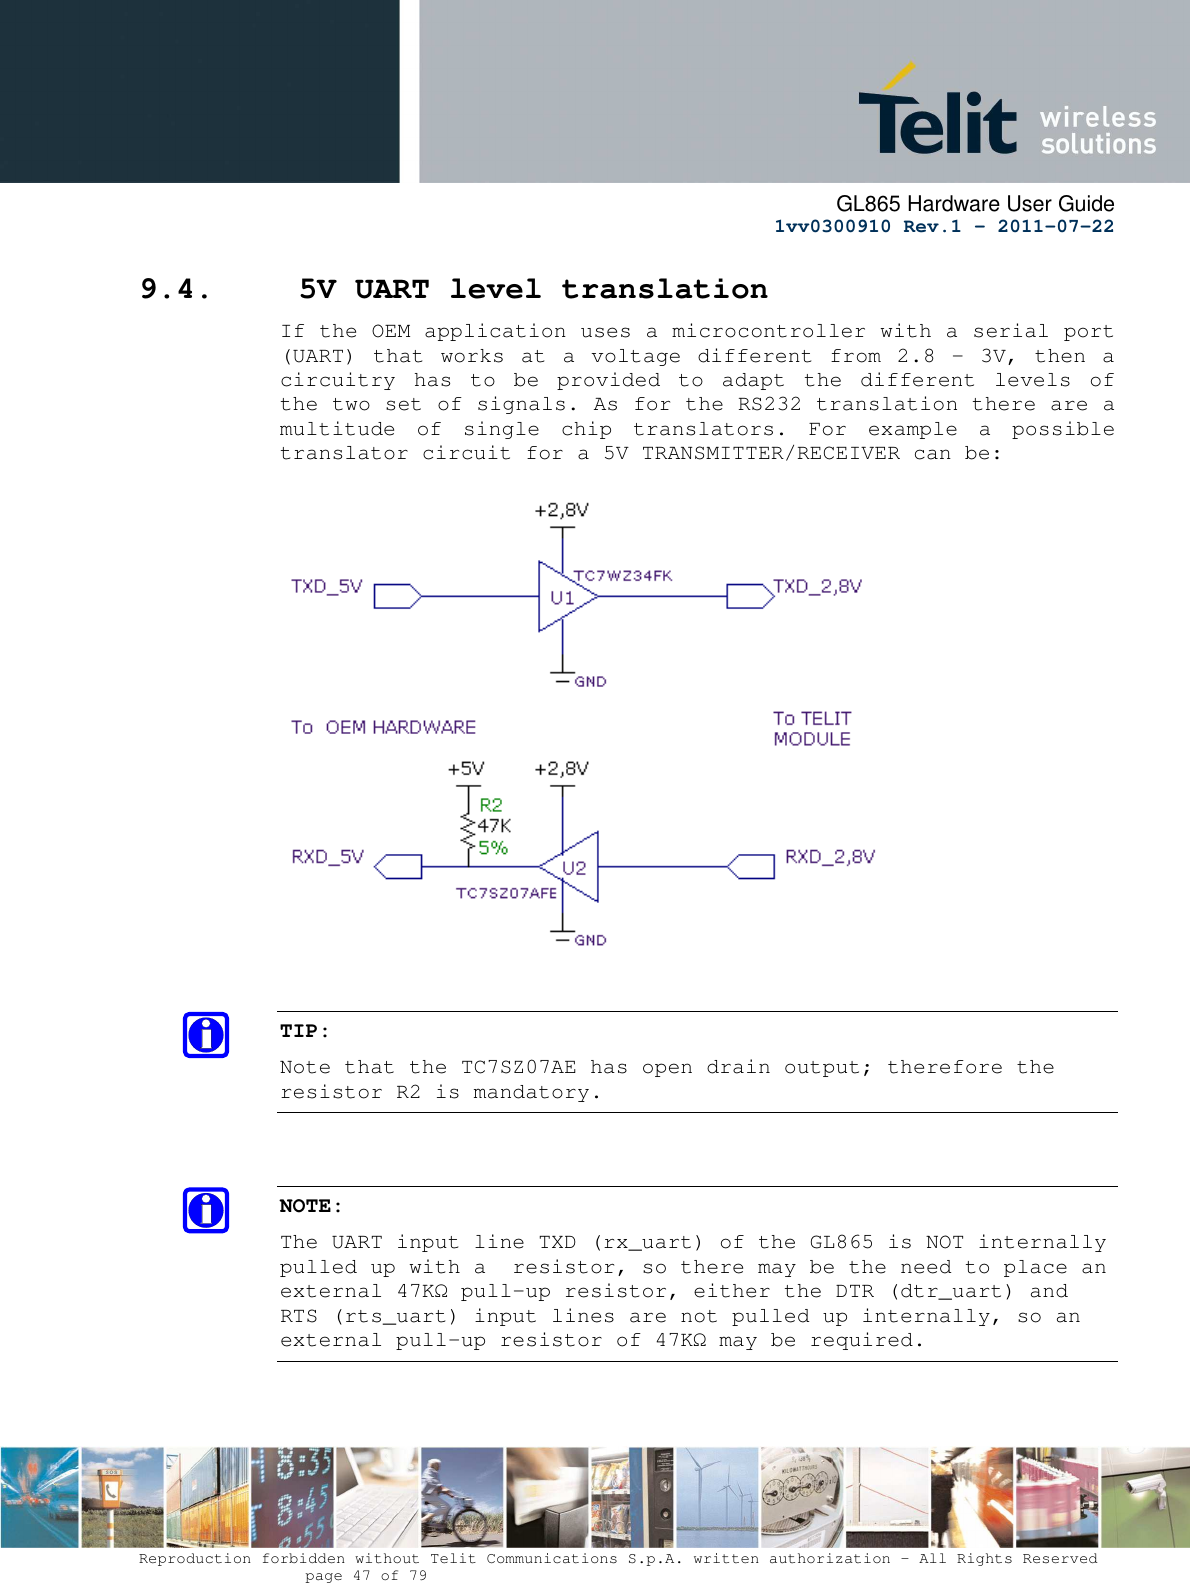      GL865 Hardware User Guide     1vv0300910 Rev.1 – 2011-07-22       Reproduction forbidden without Telit Communications S.p.A. written authorization - All Rights Reserved    page 47 of 79  9.4.  5V UART level translation If the OEM application uses a microcontroller with a serial port (UART) that  works at a voltage different from  2.8 - 3V,  then  a circuitry  has  to  be  provided  to  adapt  the  different  levels  of the two set of signals. As for the RS232 translation there are a multitude  of  single  chip  translators.  For  example  a  possible translator circuit for a 5V TRANSMITTER/RECEIVER can be:     TIP: Note that the TC7SZ07AE has open drain output; therefore the resistor R2 is mandatory.   NOTE: The UART input line TXD (rx_uart) of the GL865 is NOT internally pulled up with a  resistor, so there may be the need to place an external 47KΩ pull-up resistor, either the DTR (dtr_uart) and RTS (rts_uart) input lines are not pulled up internally, so an external pull-up resistor of 47KΩ may be required.   